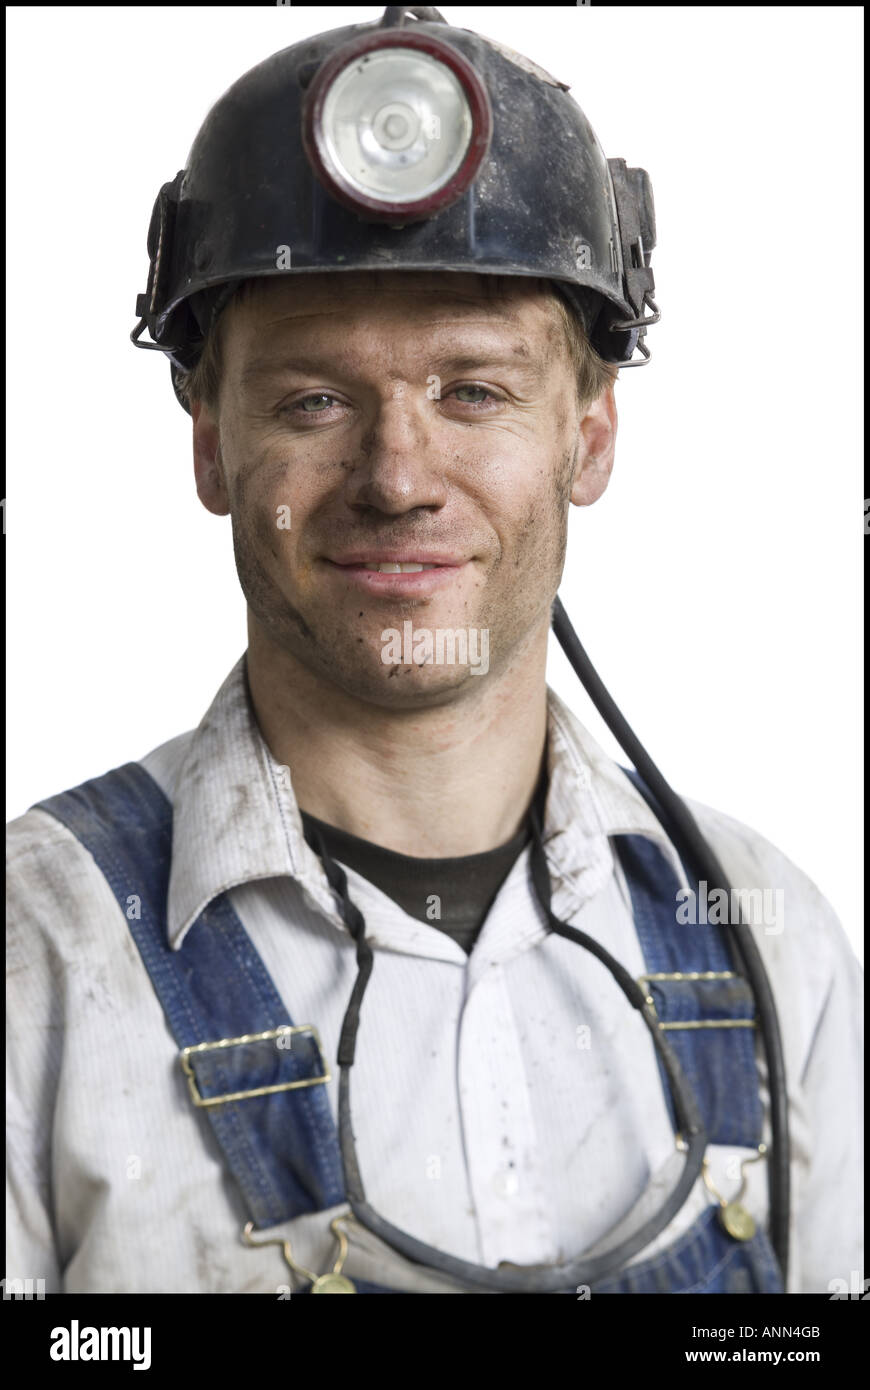 Portrait of a coal miner wearing a hardhat Stock Photo